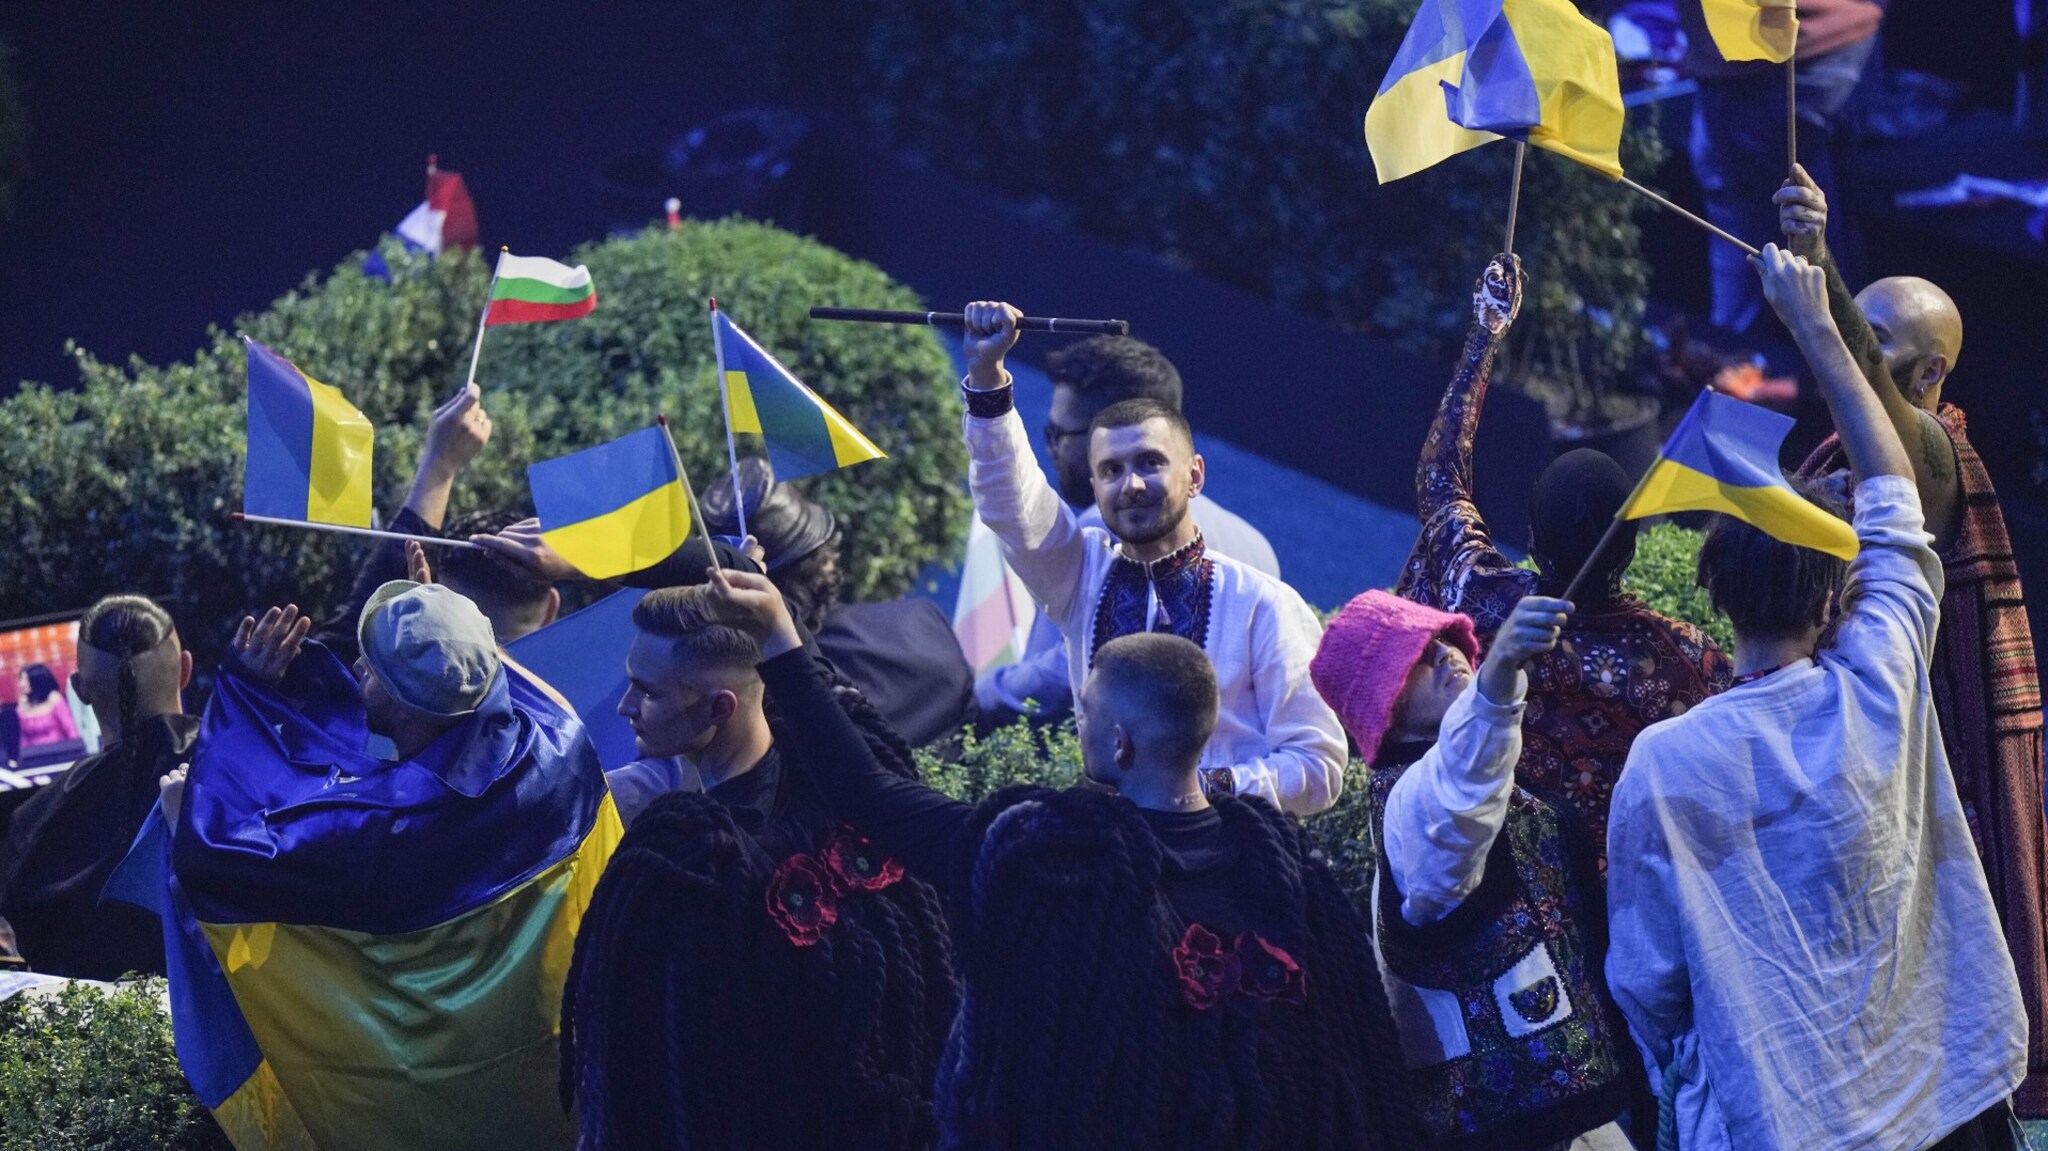 Who will organize the Eurovision Song Contest next year if Ukraine wins?